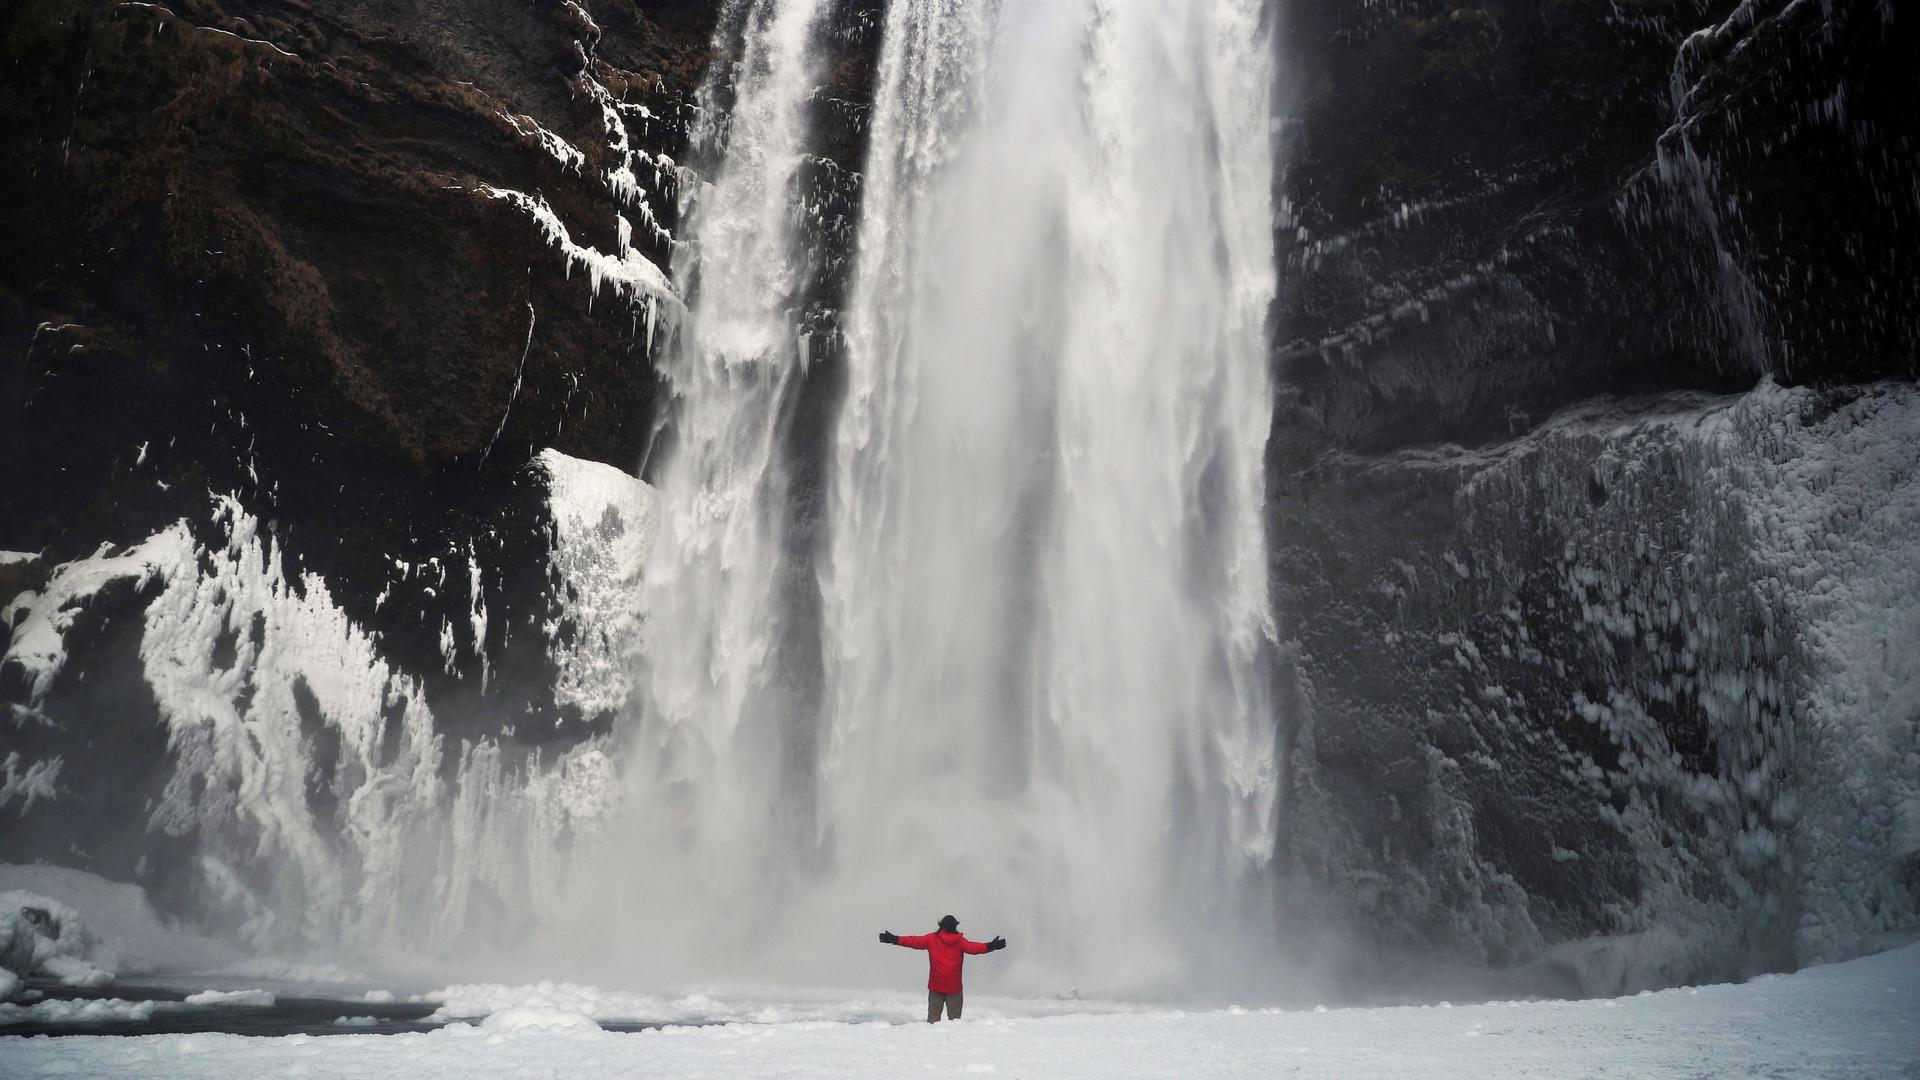 A man stands in front of the Skogafoss waterfall in Skogar, Iceland, March 8, 2020. 